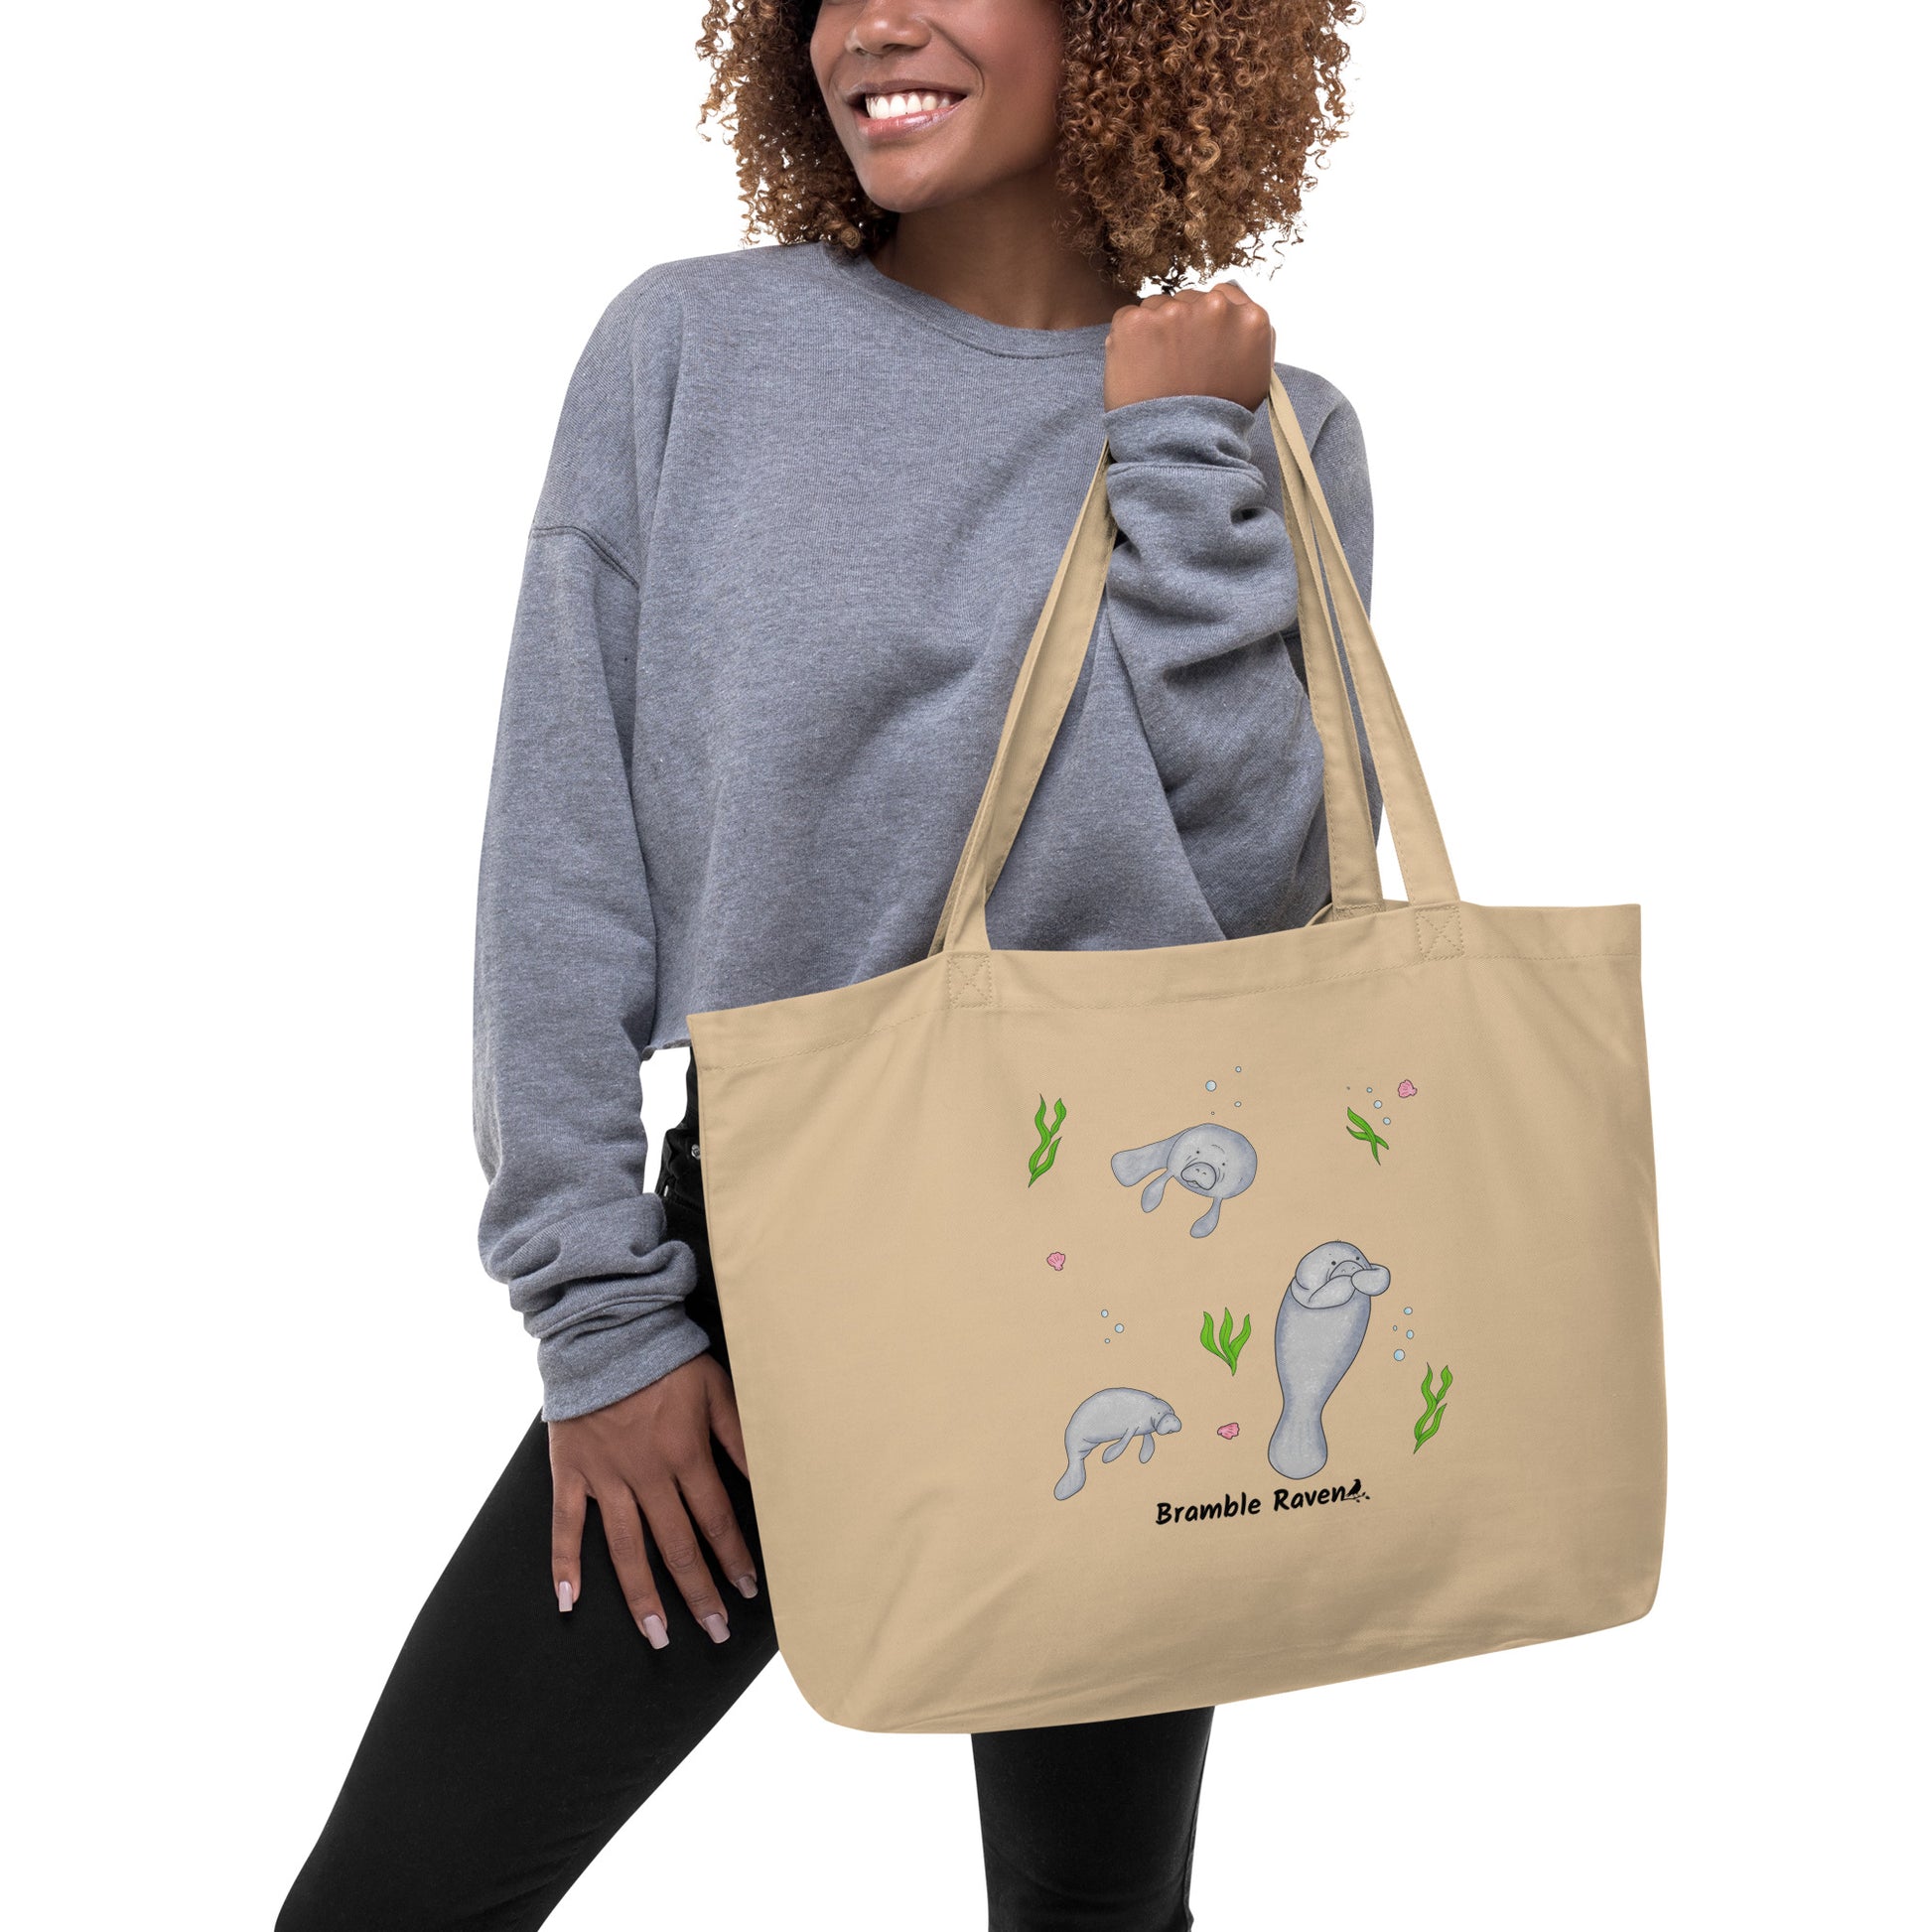 20″ × 14″ × 5″ 100% organic cotton tote bag. Features three manatees with accents of seashells, seaweed, and bubbles. Oyster colored fabric with dual handles. Shown hanging from female model's hand.